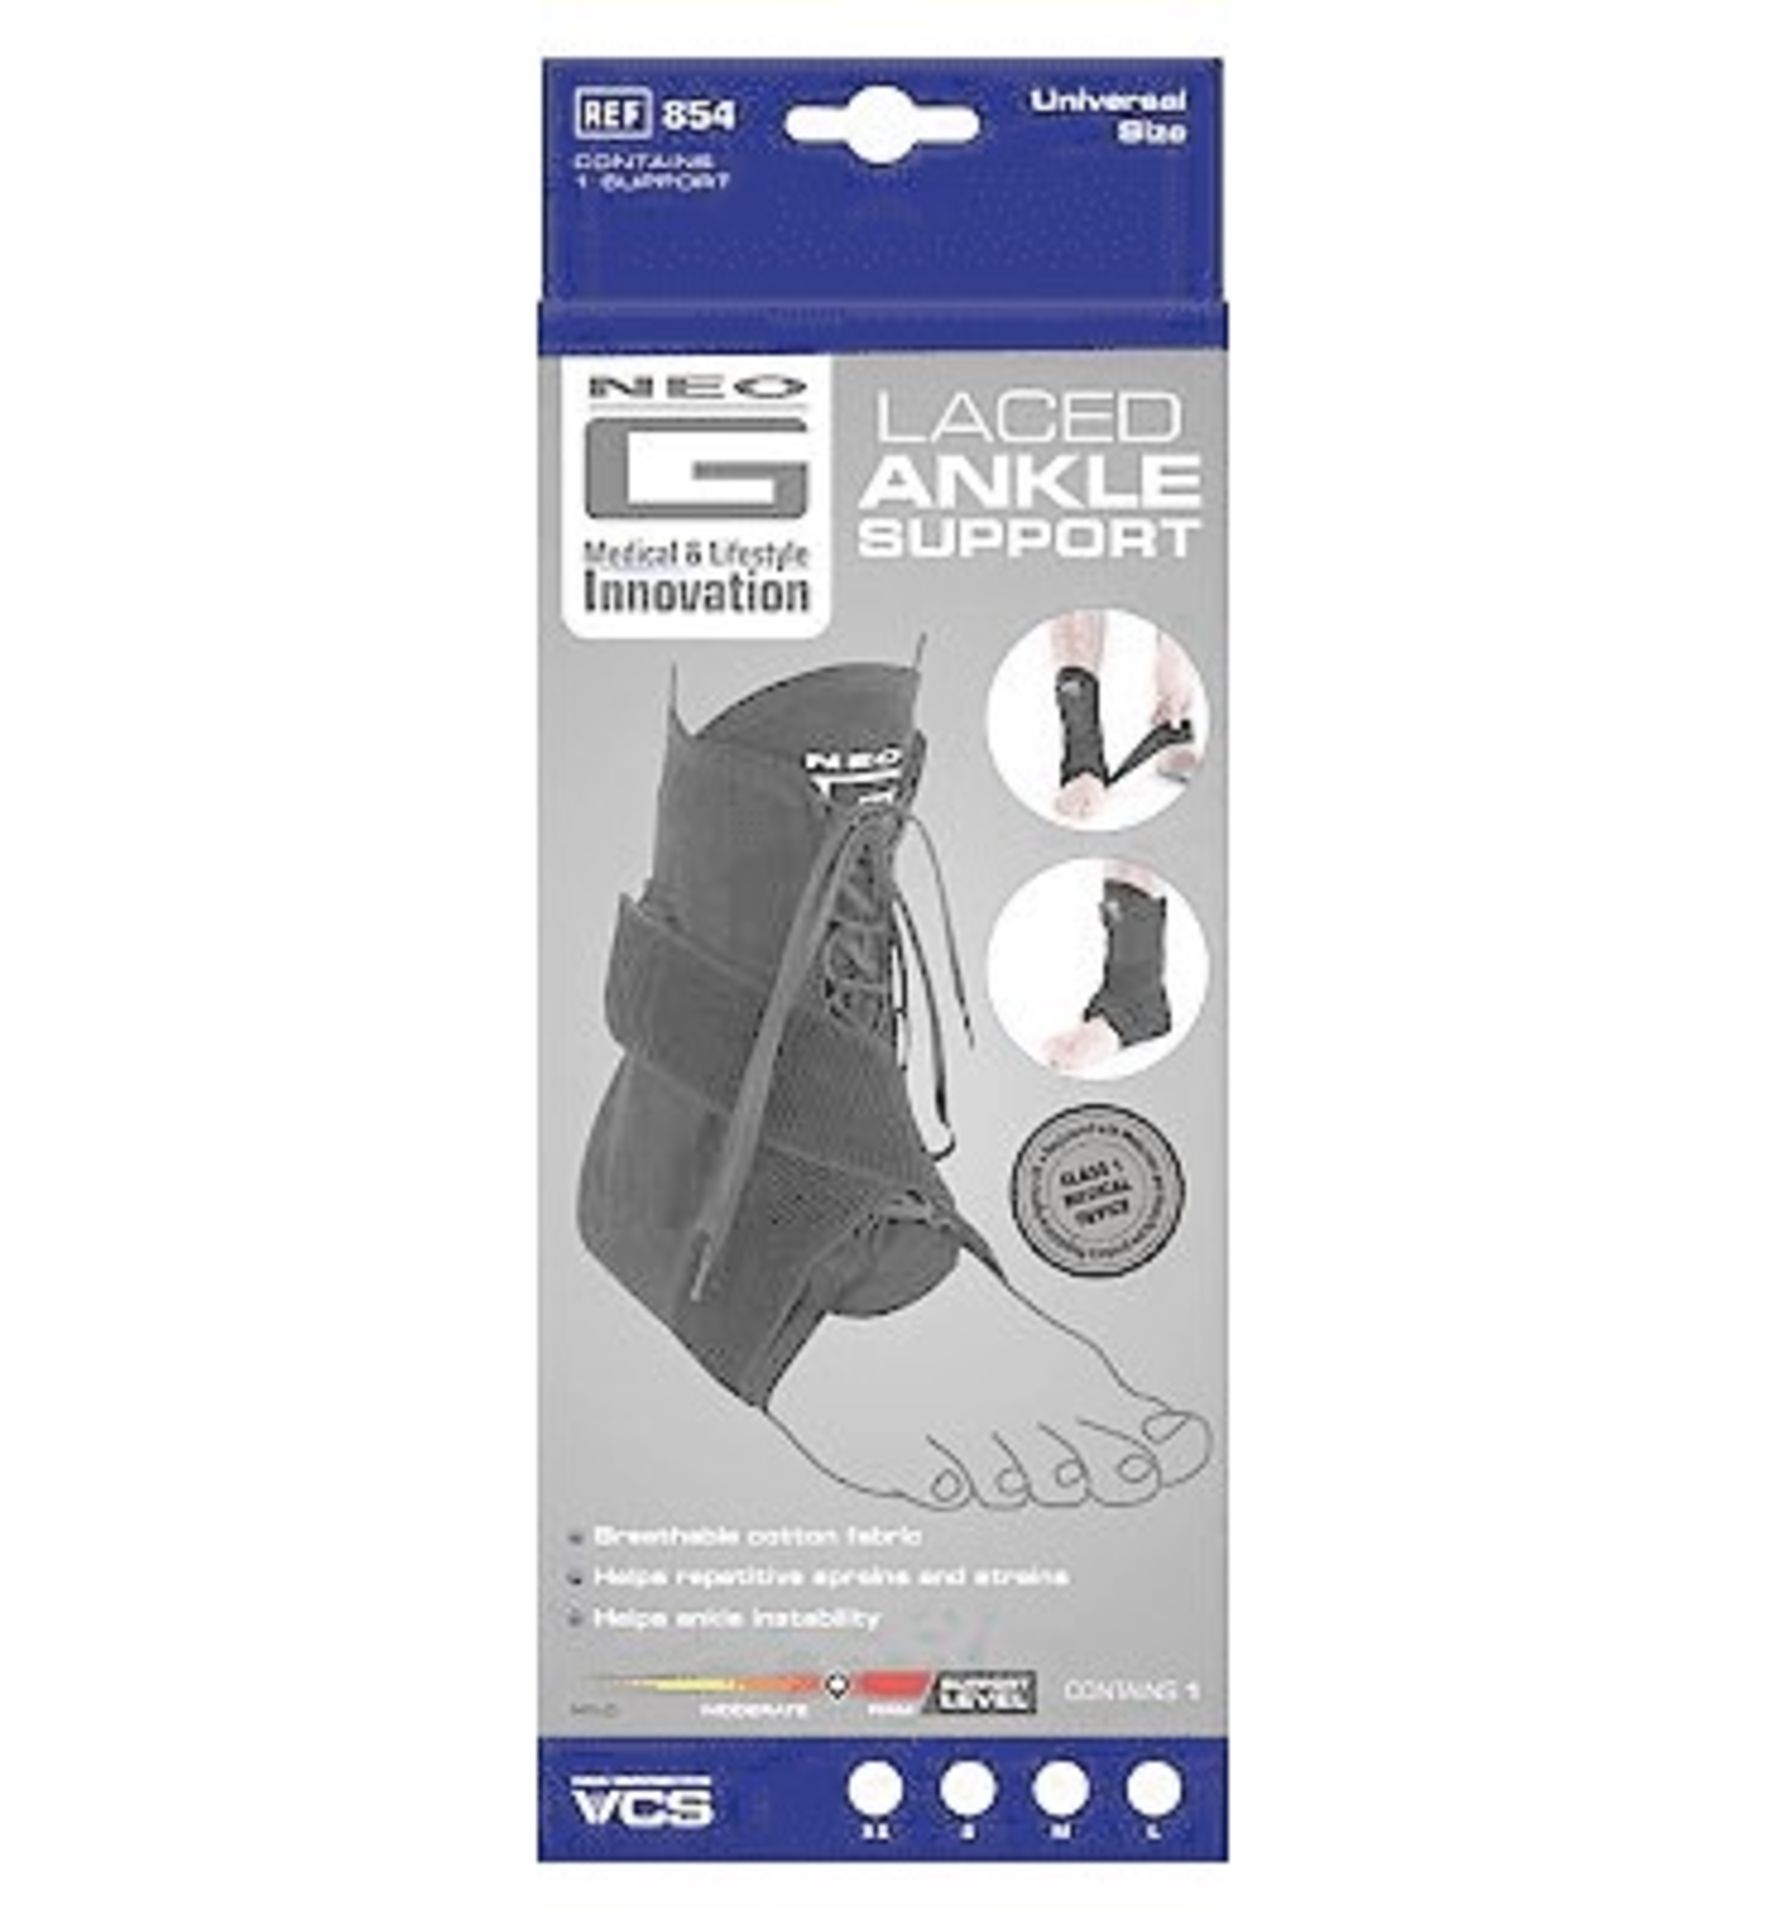 ME : 1 AS NEW BOXED NEO G LACED ANKLE SUPPORT - SIZE MEDIUM / RRP £26.99 (VIEWING HIGHLY